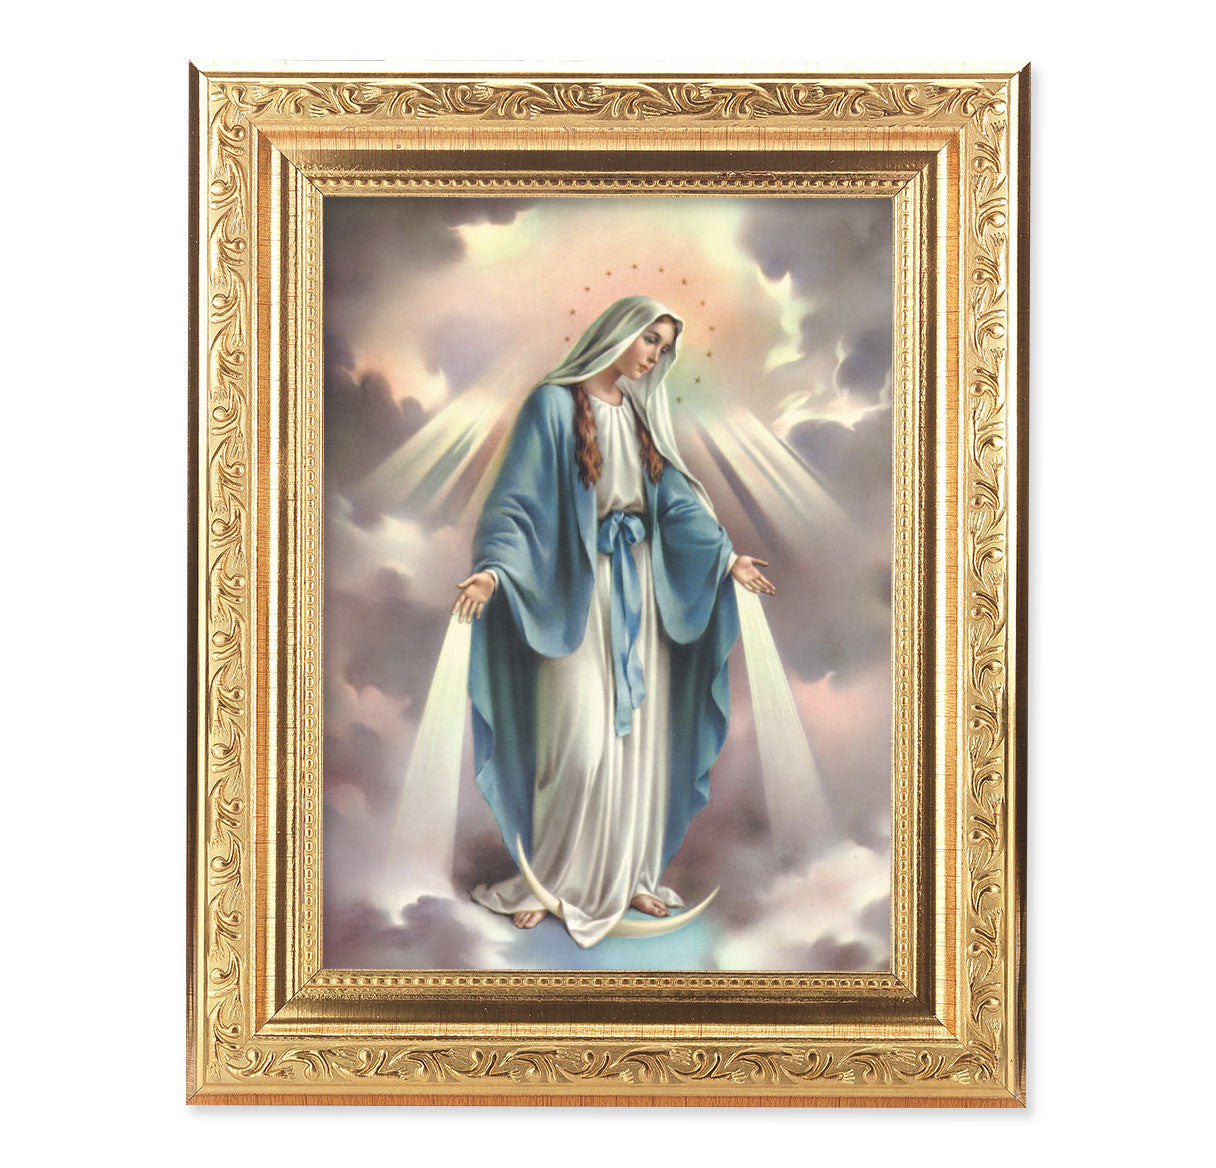 Our Lady of Grace Antique Gold Framed Art